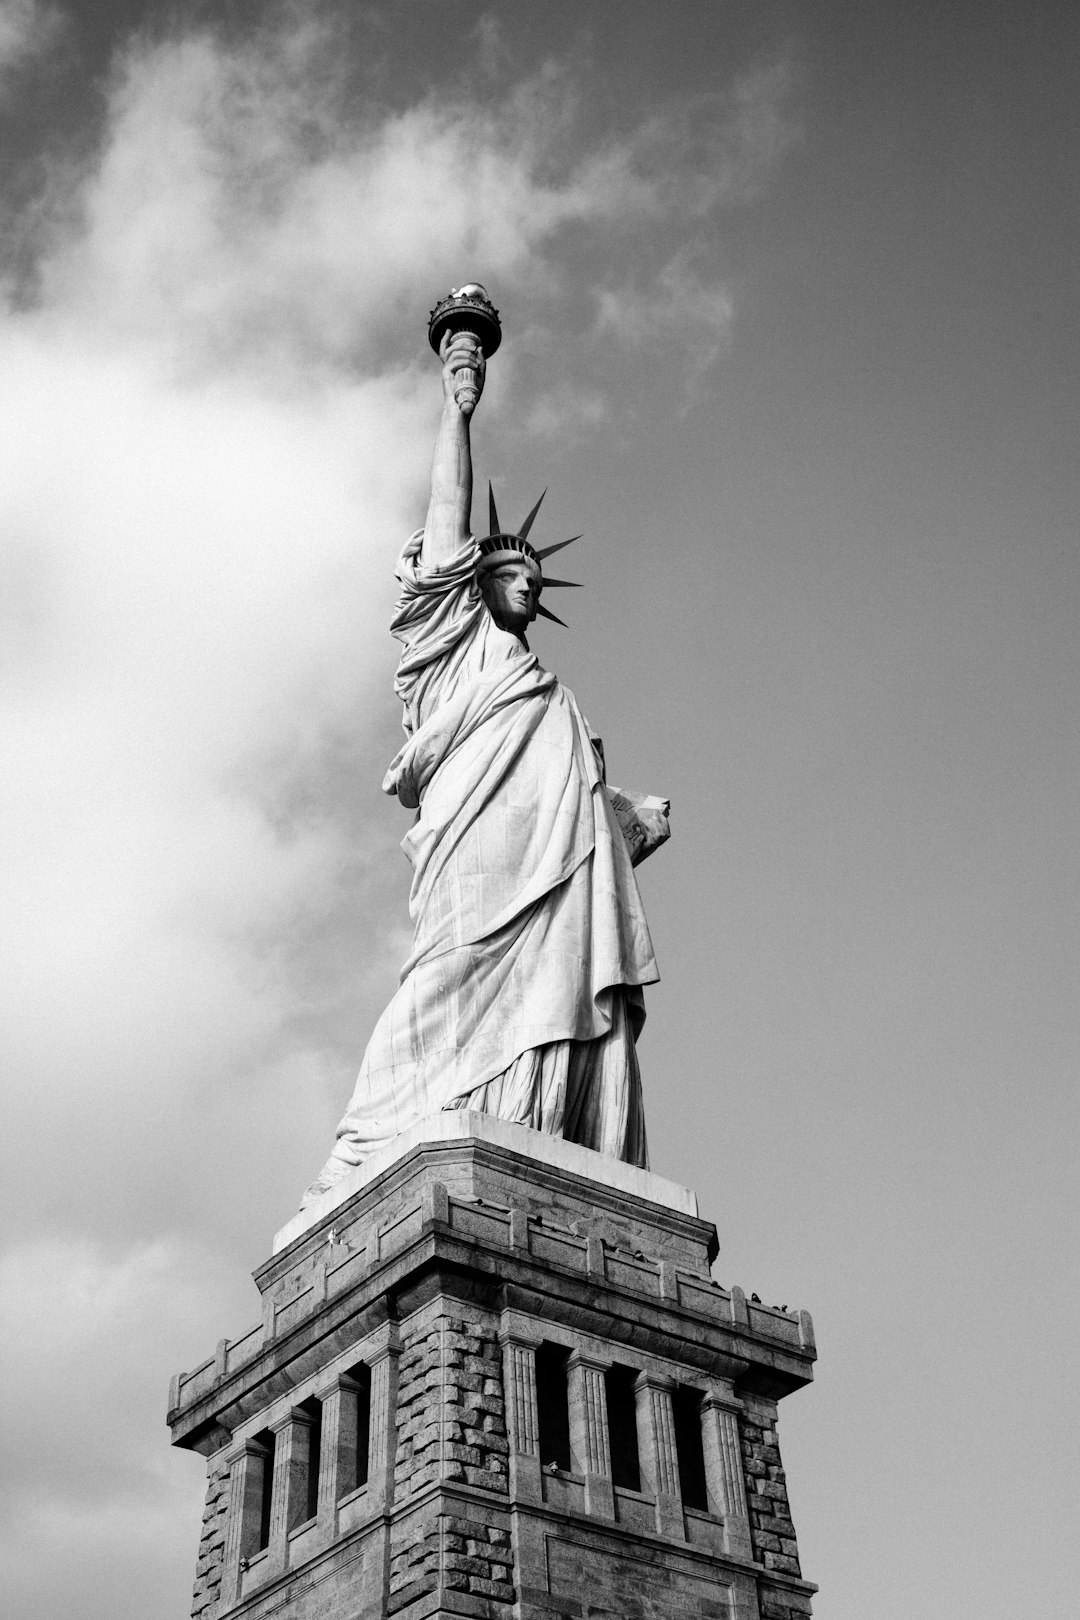 Black and white photo of the Statue of Liberty, Nikon D850 DSLR